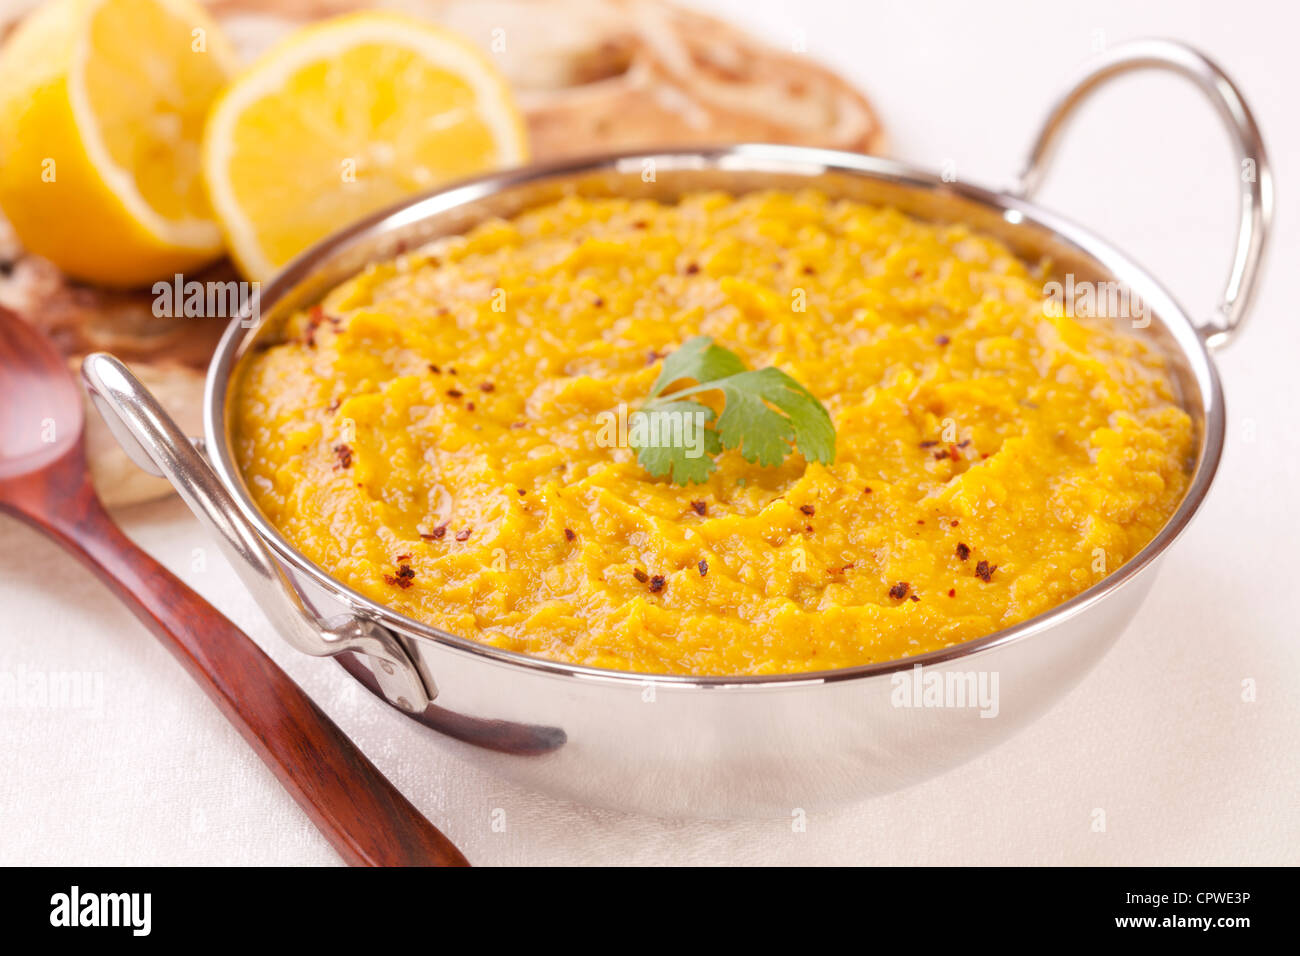 A balti dish filled with tasty Indian dhal or dal, with naan bread and lemon in the background. Shallow DOF focus on foreground. Stock Photo